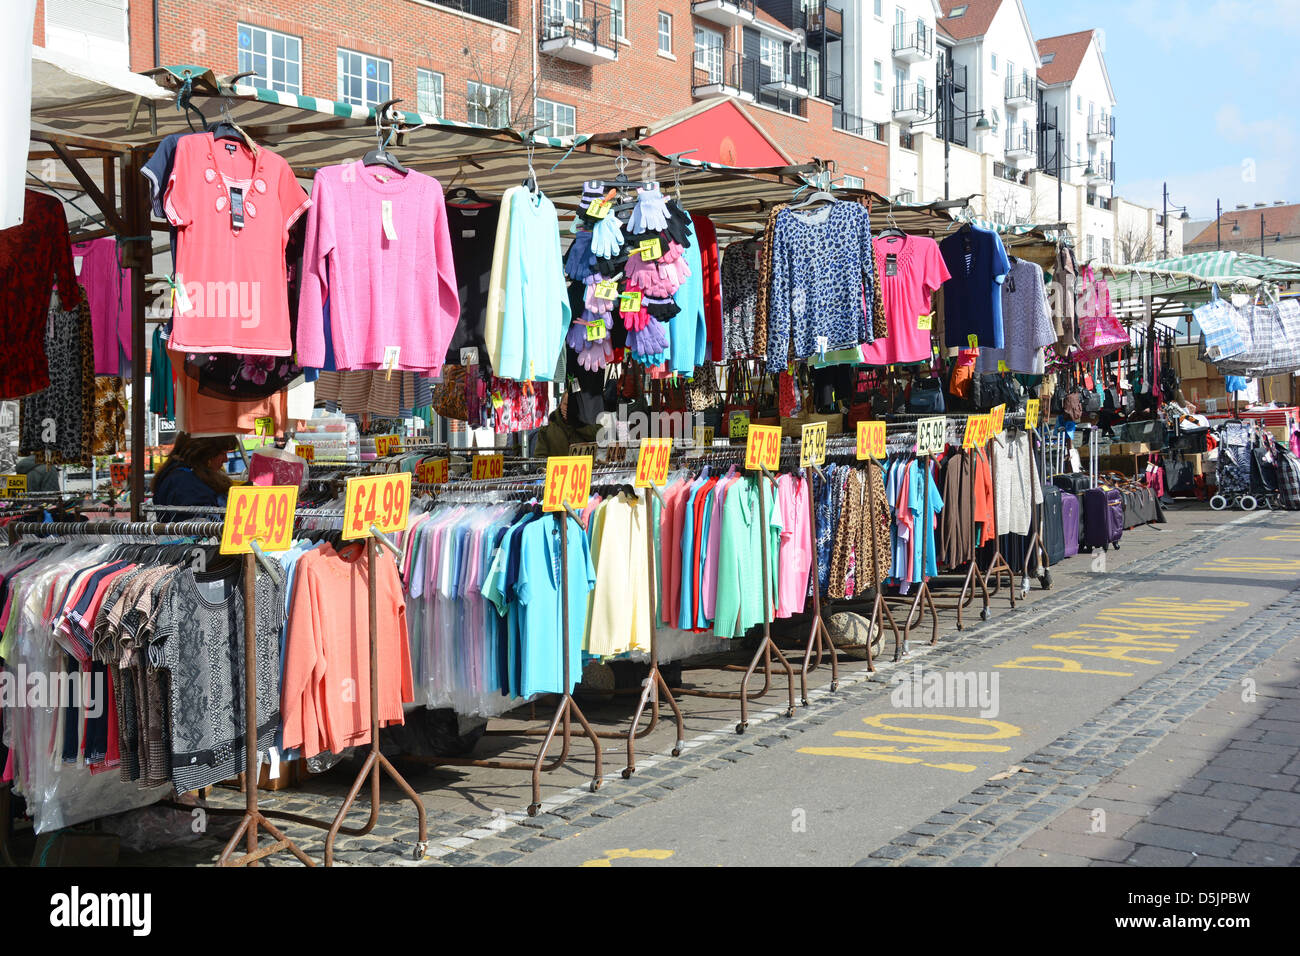 Romford market stall with bargain clothing on hanging rails with price tags Stock Photo